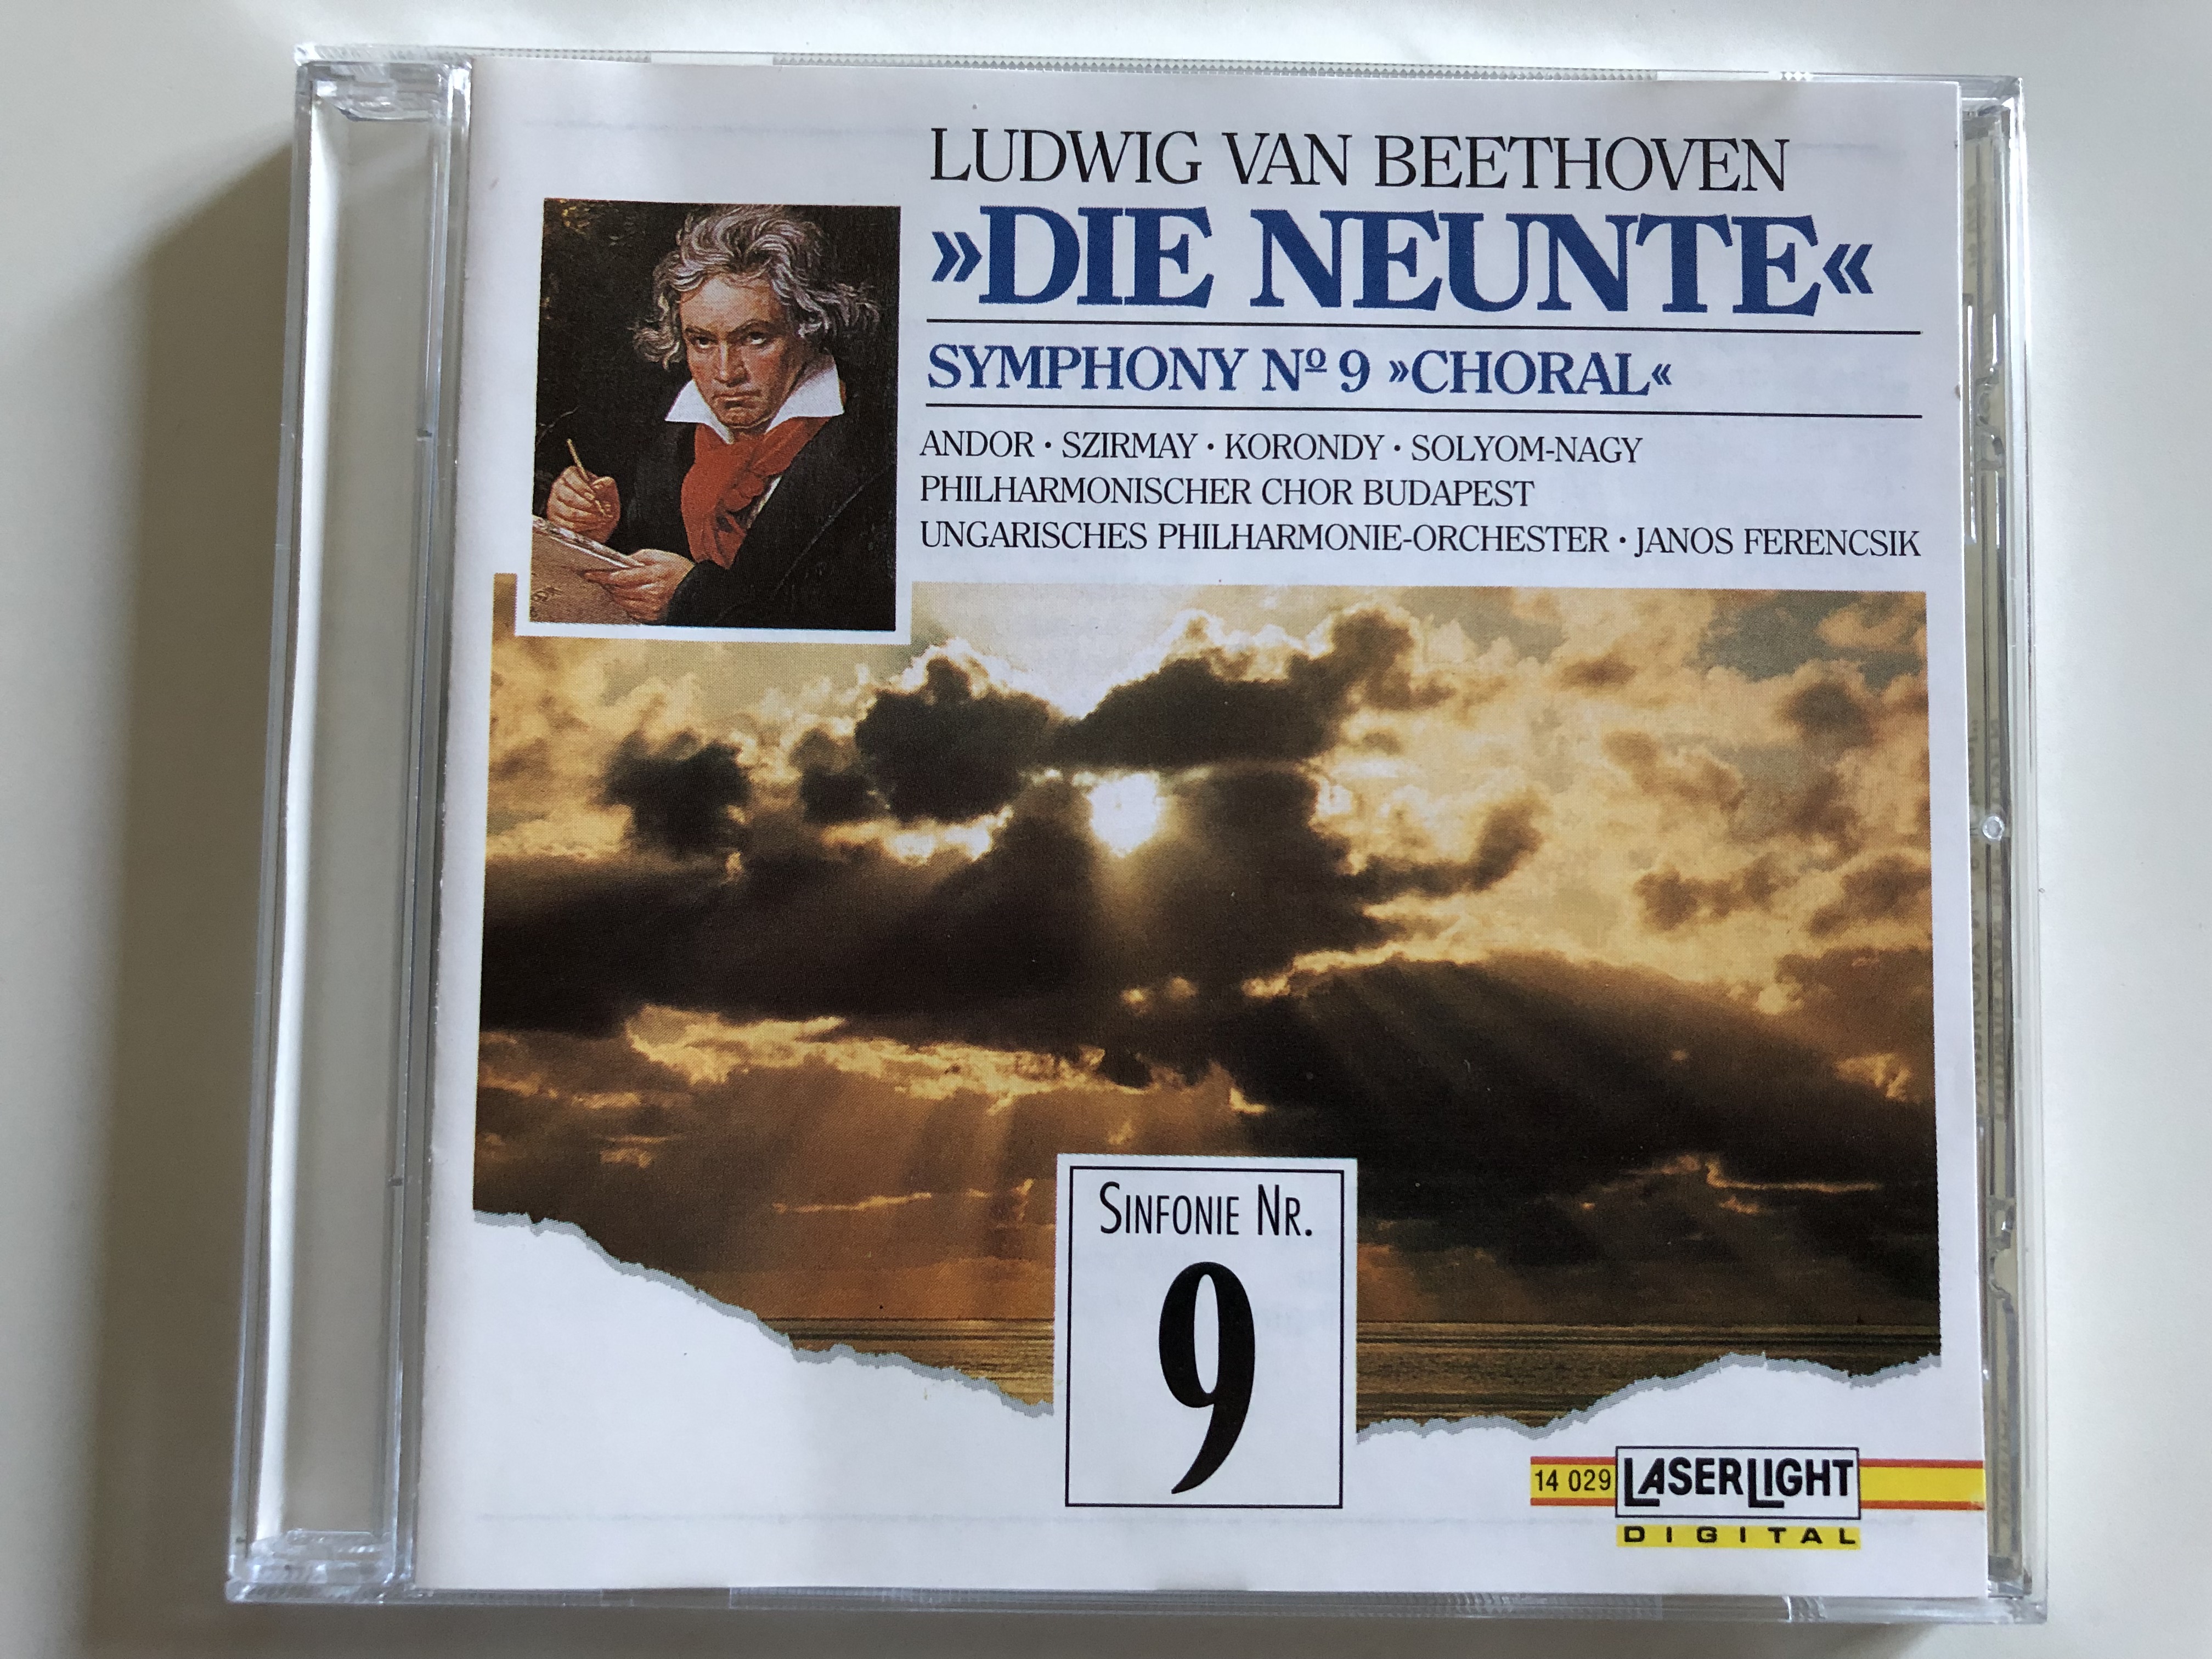 ludwig-van-beethoven-die-neunte-symphony-no.9-choral-andor-szirmay-korondy-solyom-nagy-philharmonicher-chor-budapest-ungarisches-philharmonie-orchester-conducted-janos-ferencsik-1-.jpg